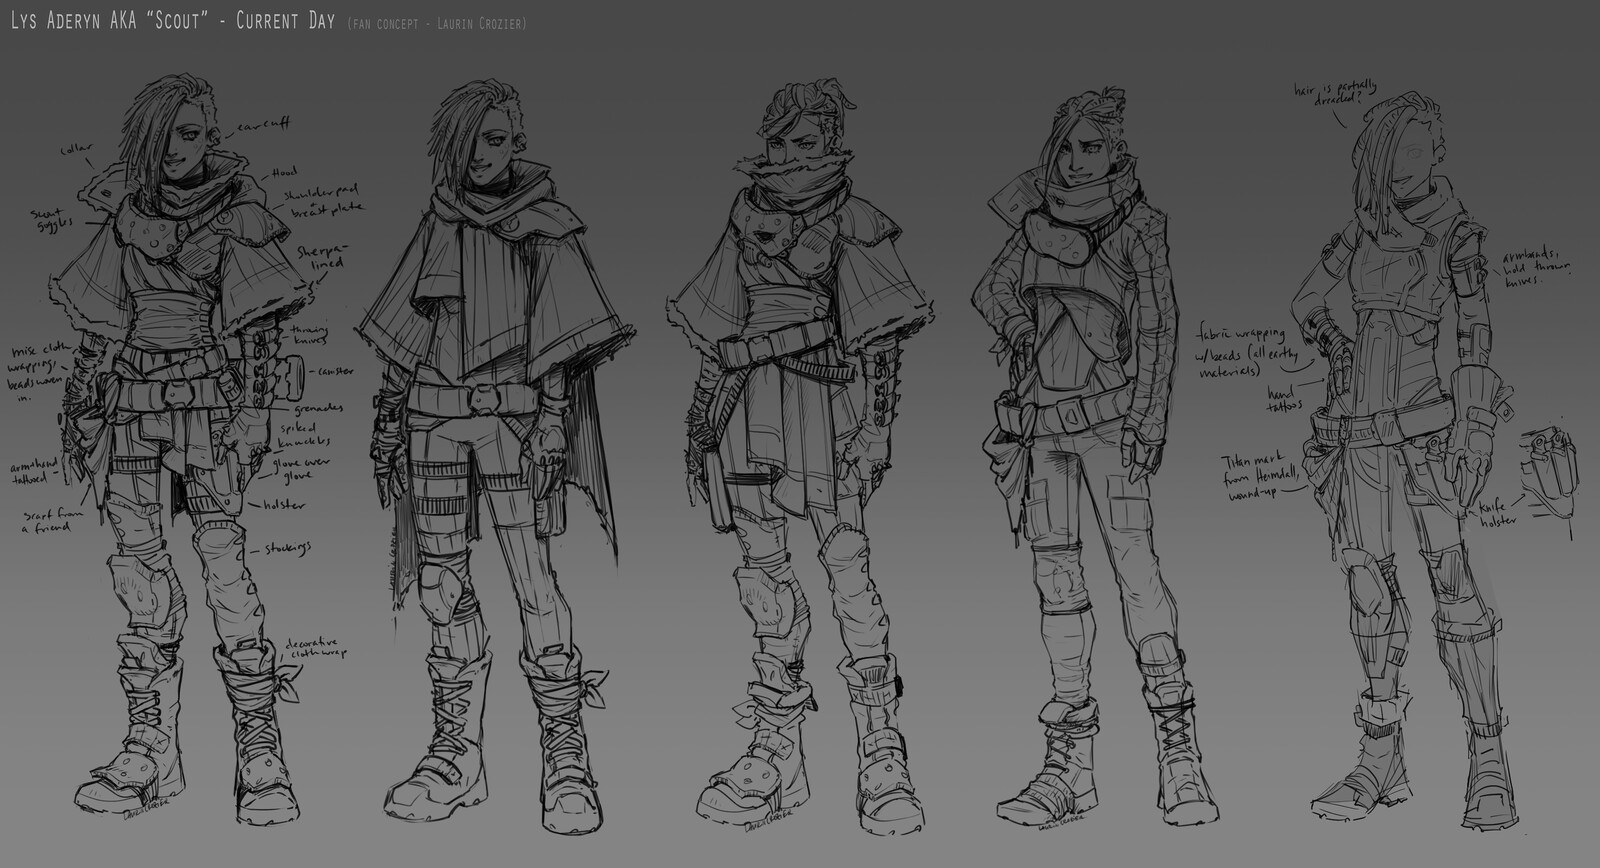 4th pass of roughs, trying to bring more natural/boho style to mix with the tactical accessories, while trying to retain a sense of practicality/functionality.